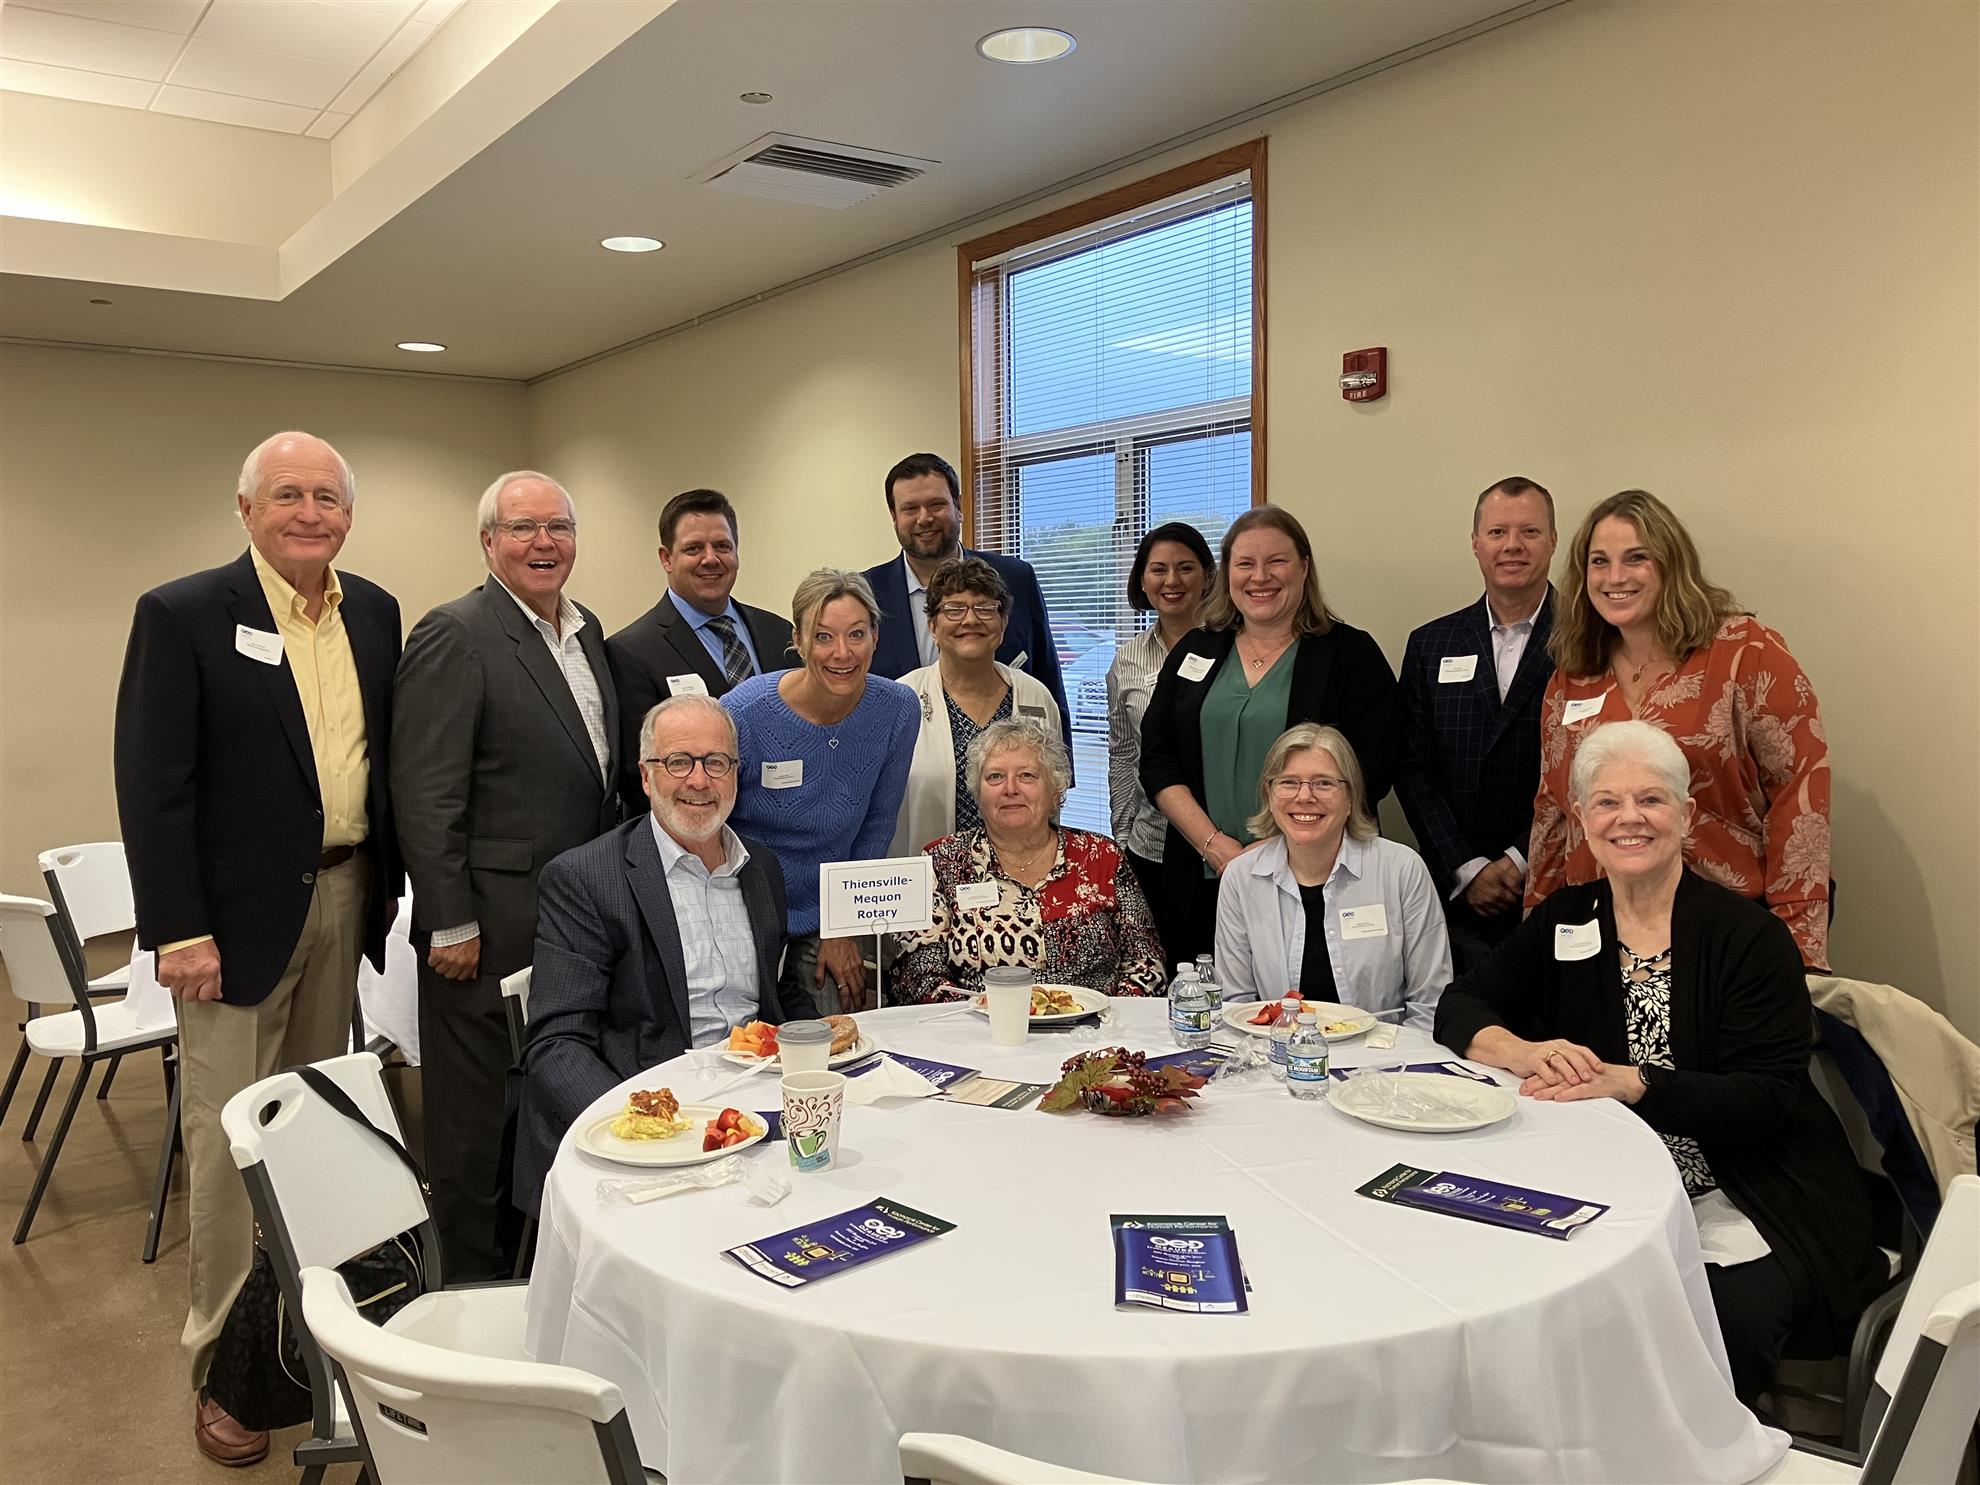 Stories Rotary Club of Thiensville-Mequon pic